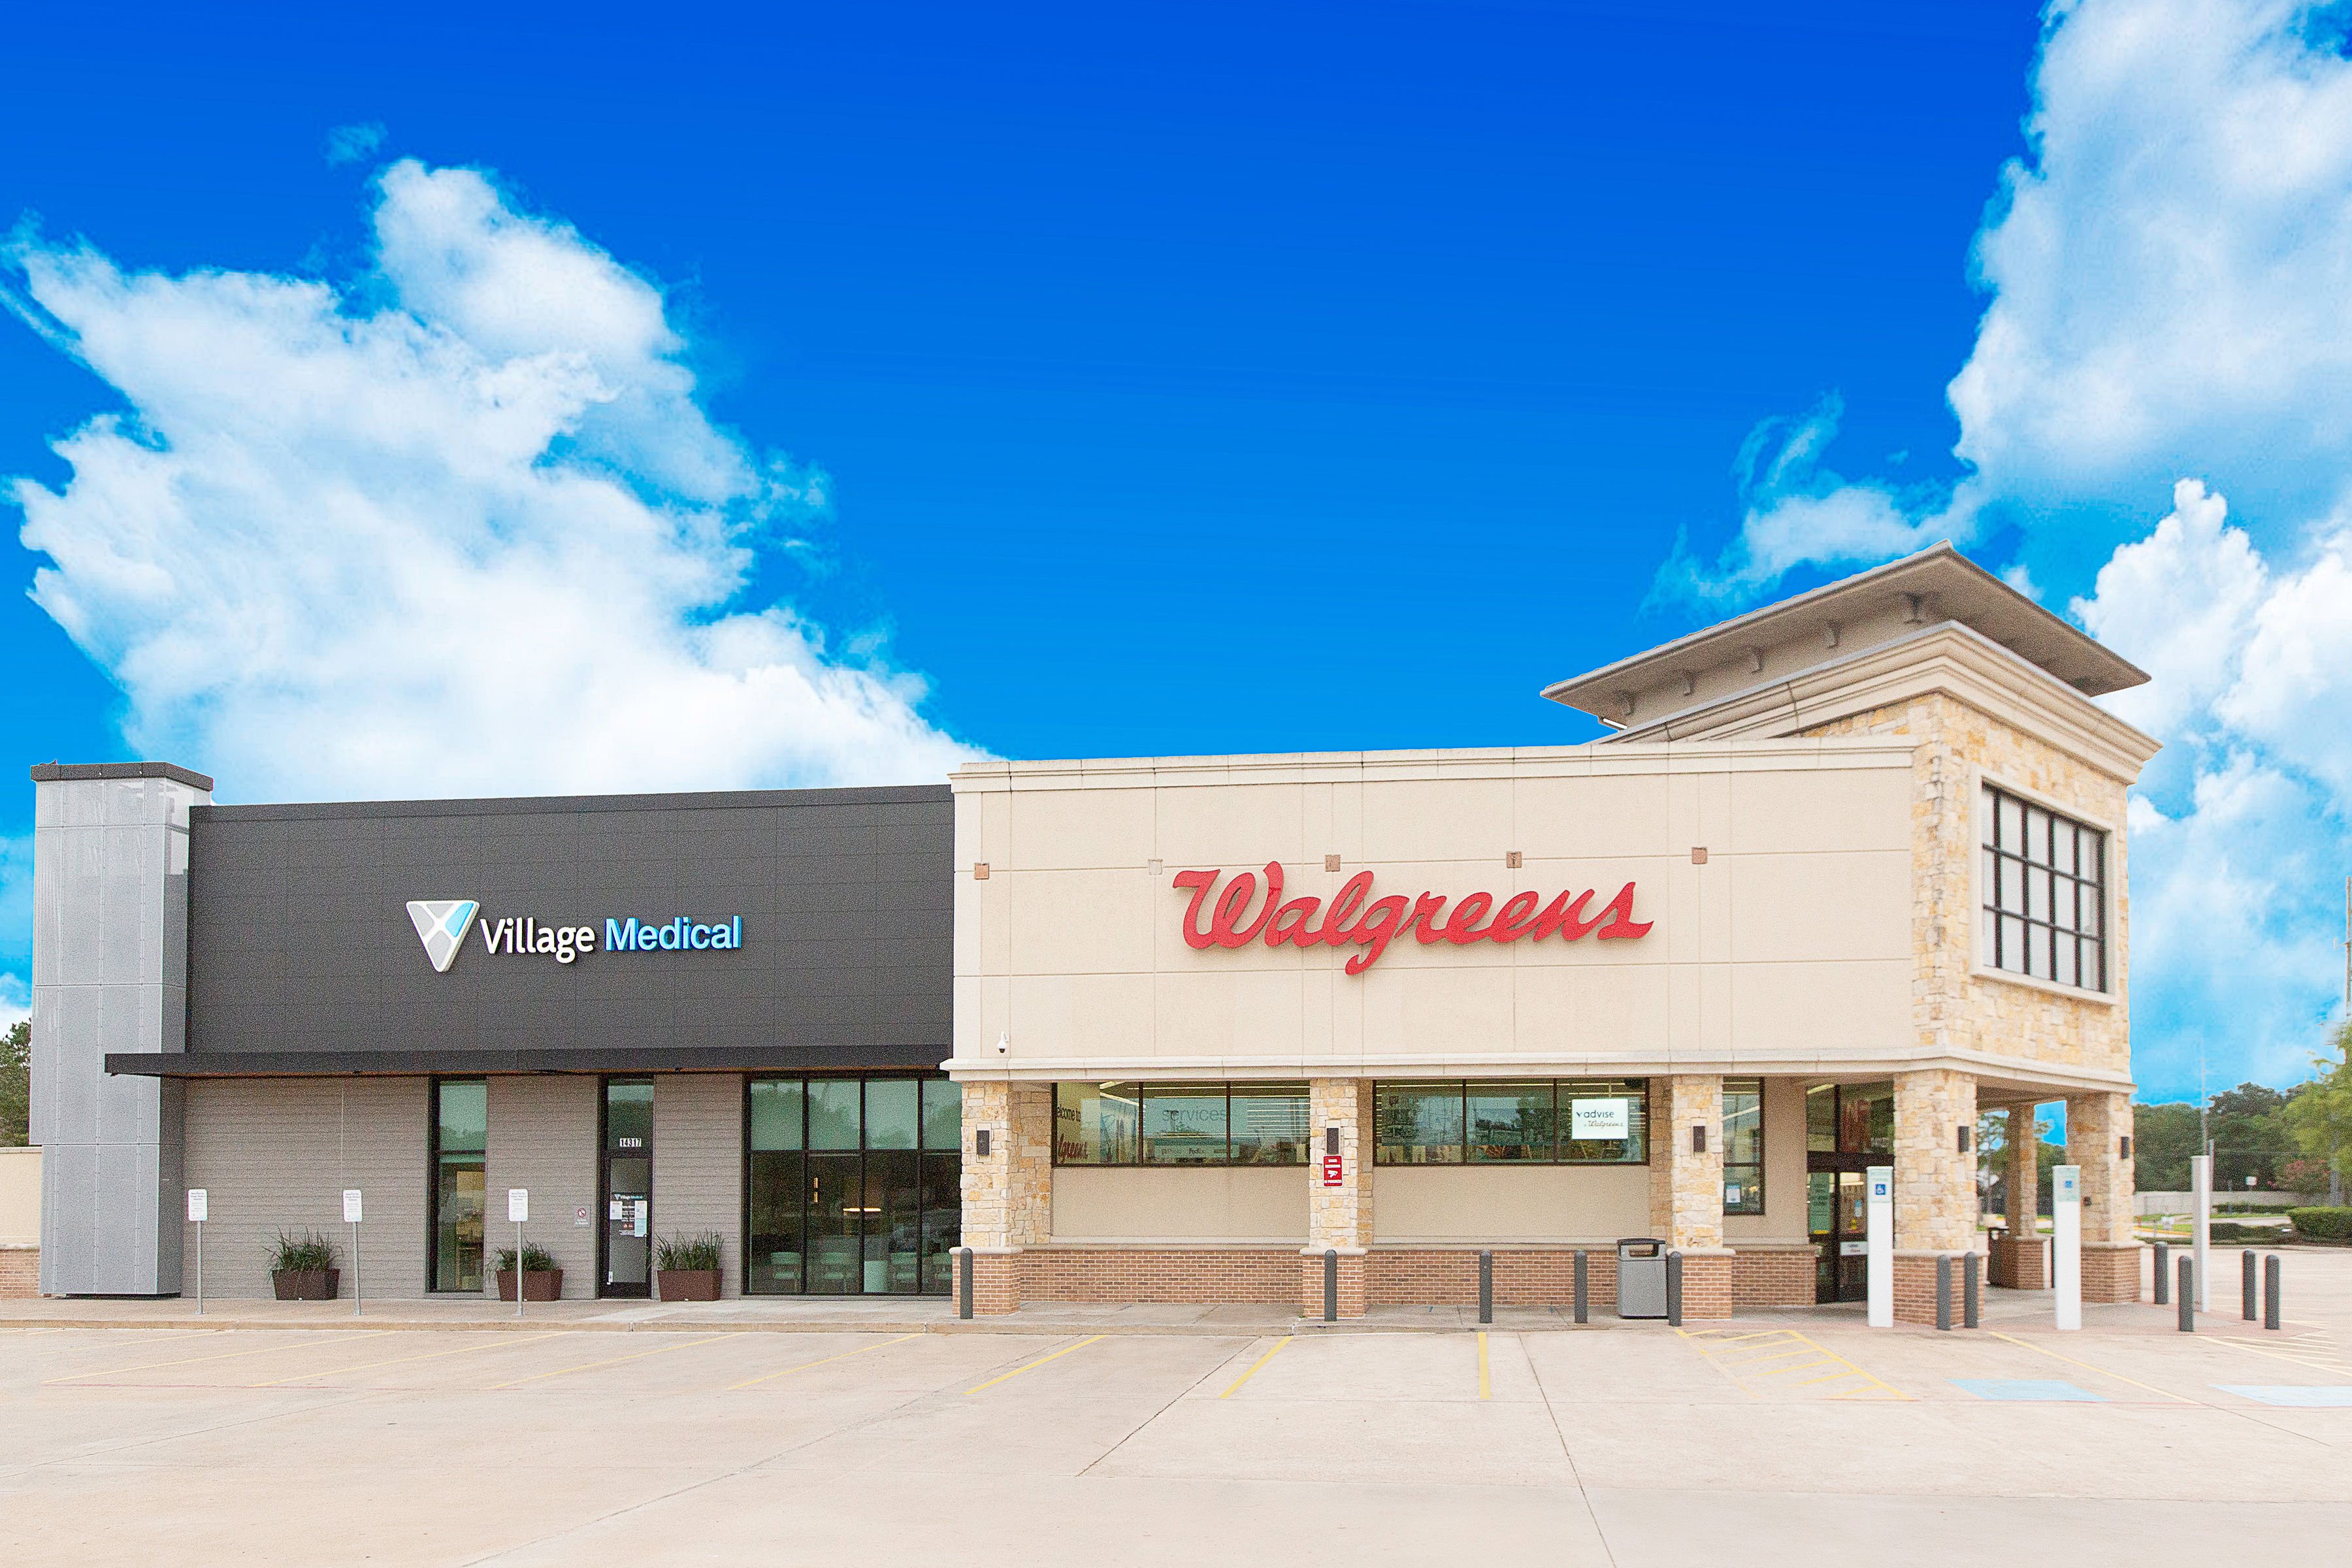 Why Are CVS and Walgreens Always Together? (Solved)